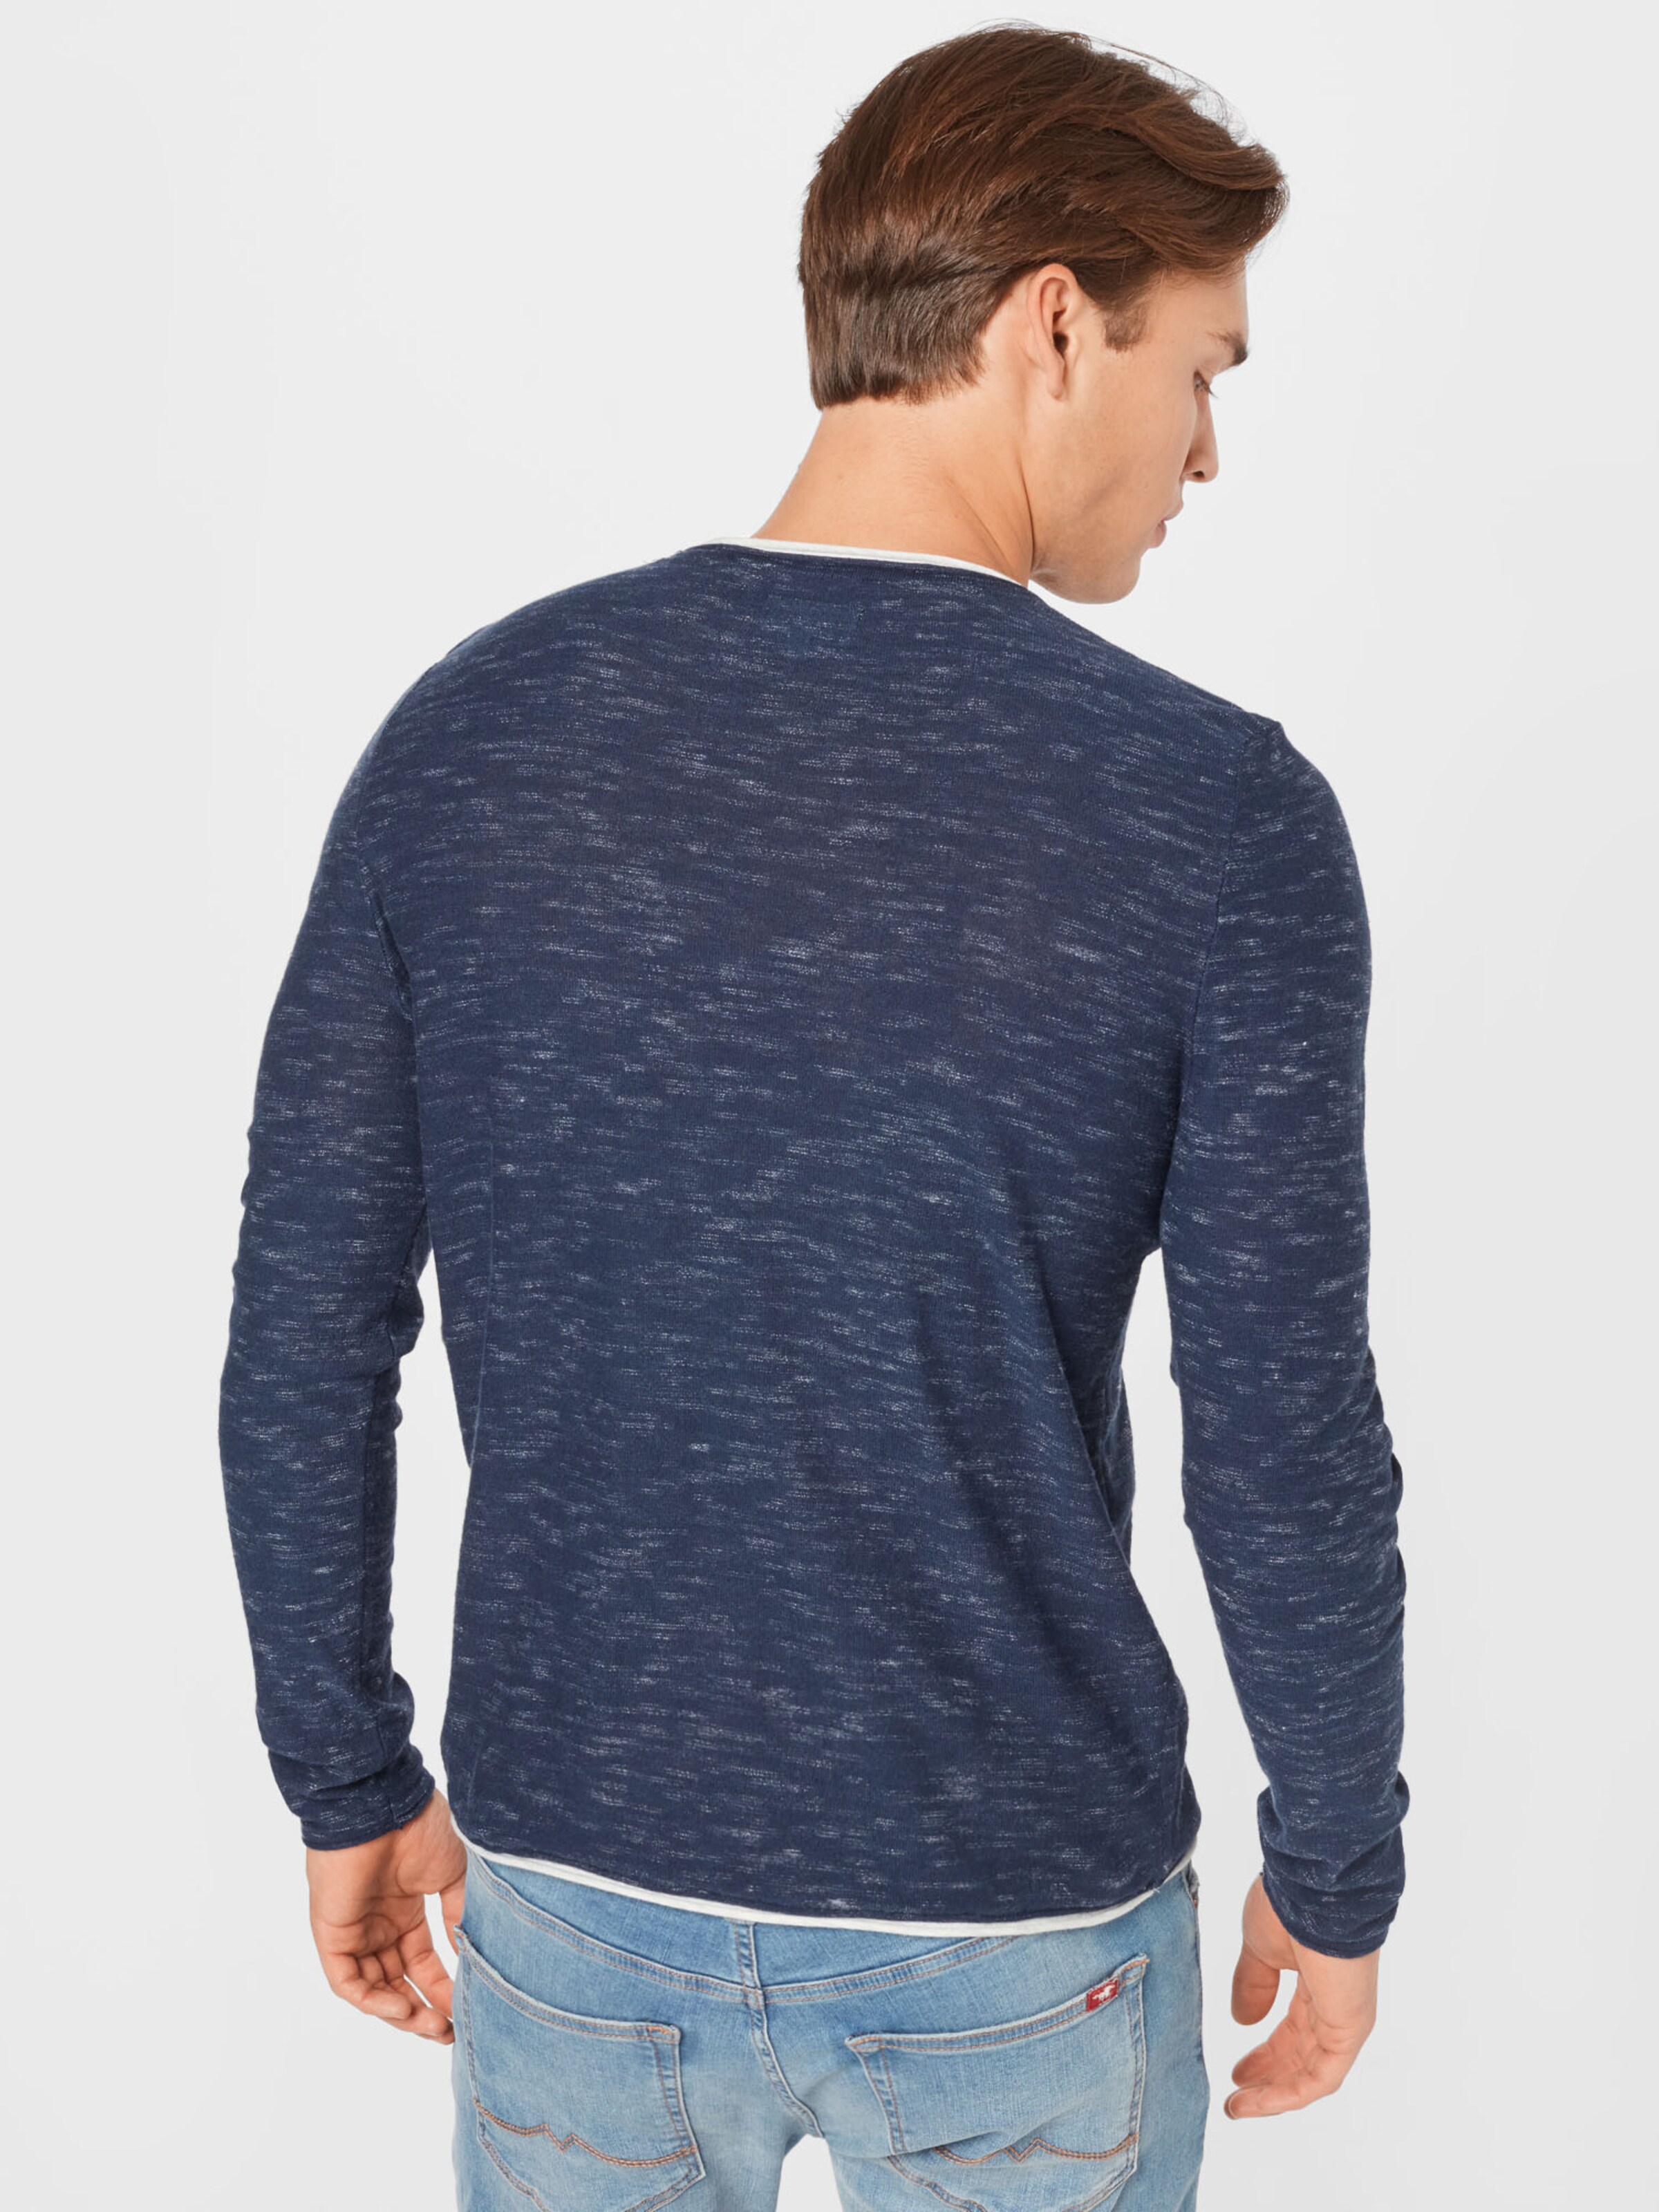 Männer Pullover & Strick QS by s.Oliver Pullover in Blau - GQ66983